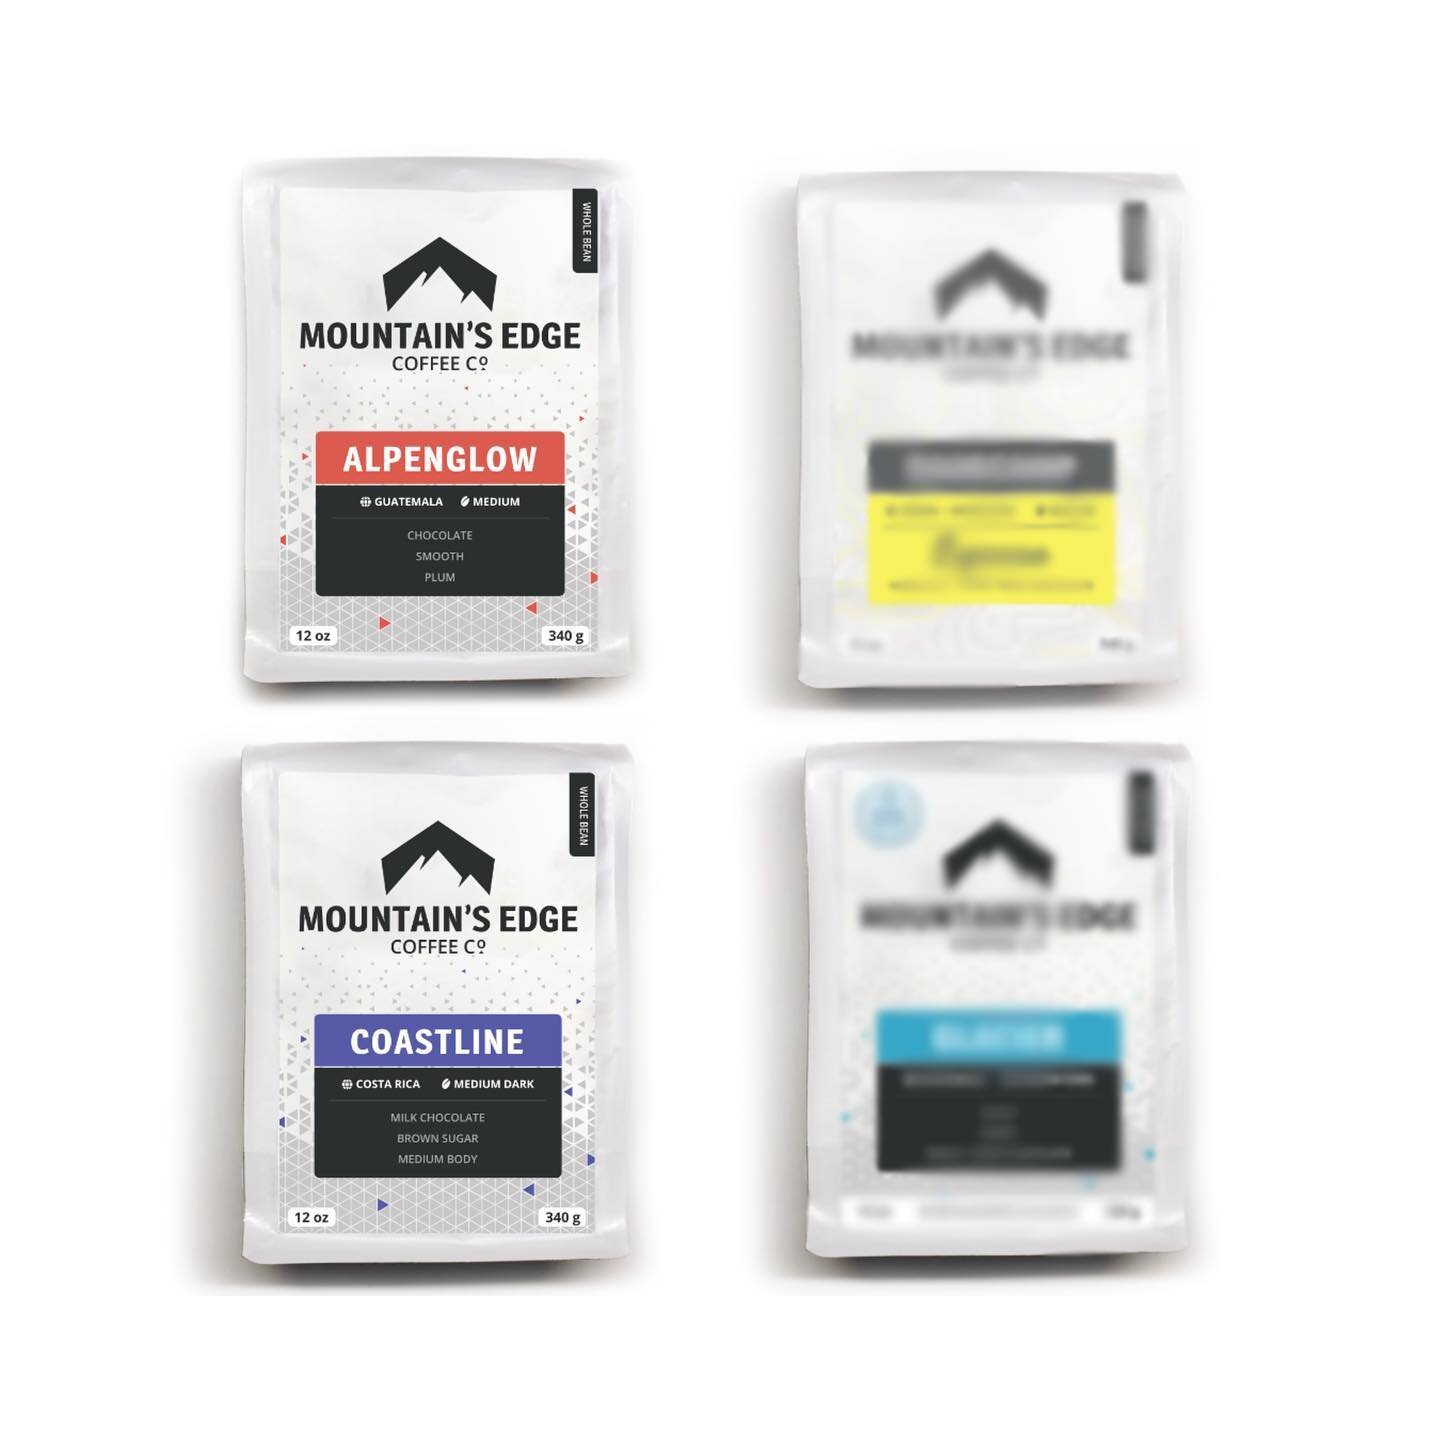 ☕️ COMING SOON... ☕️
 
Get ready coffee lovers, we&rsquo;re adding 2 new roasts to our regular product line!
 
Tell us what you&rsquo;re hoping for 🤞🤞

#mountainsedgecoffee #northvancouver #comingsoon #coffeelover